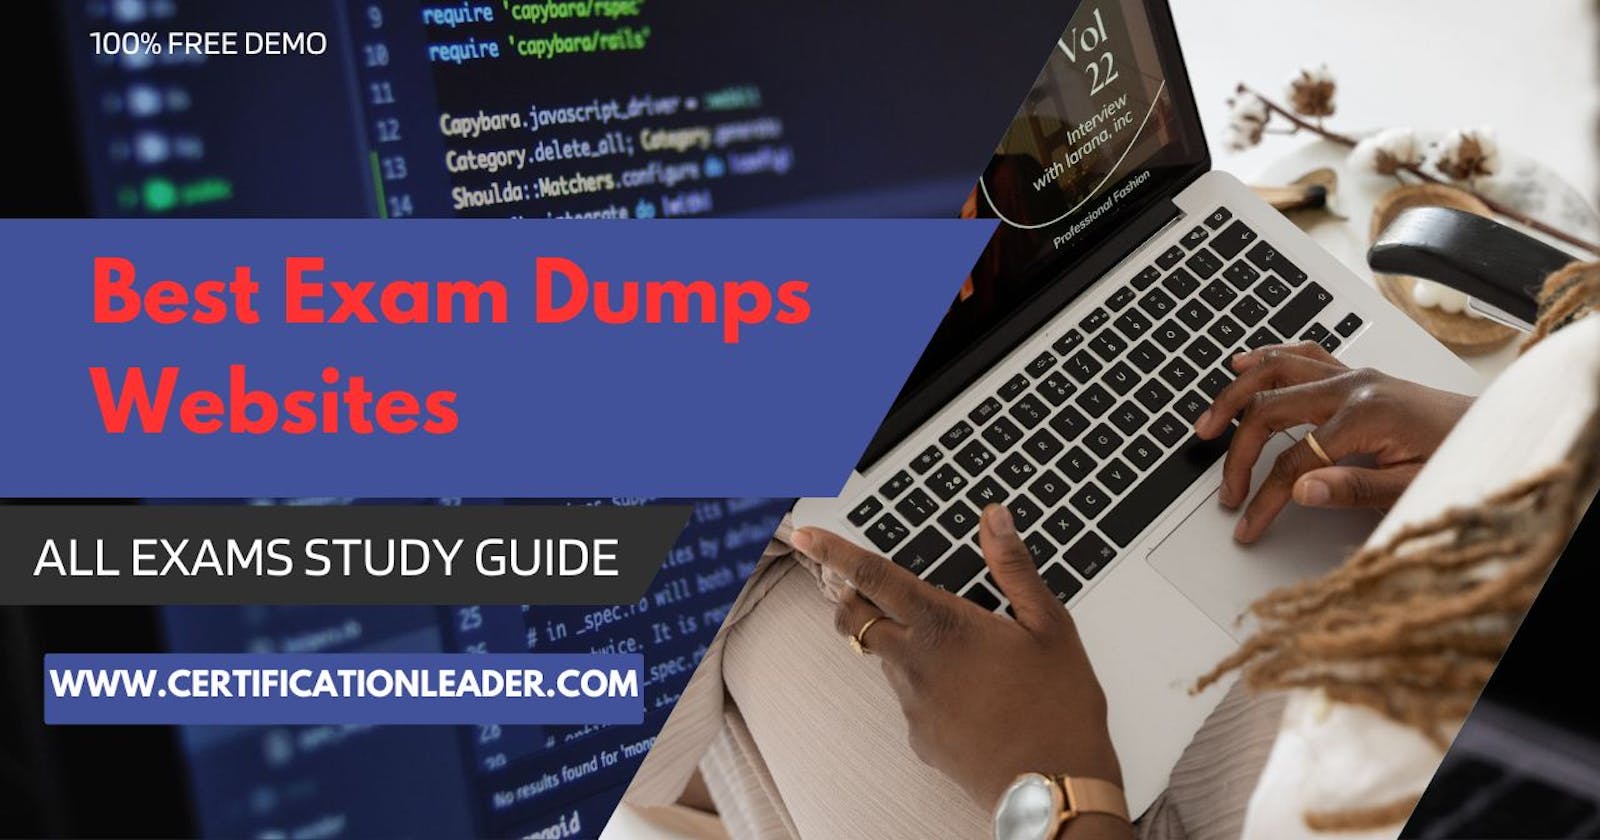 Choose Wisely: Best Exam Dumps Websites for Your Success